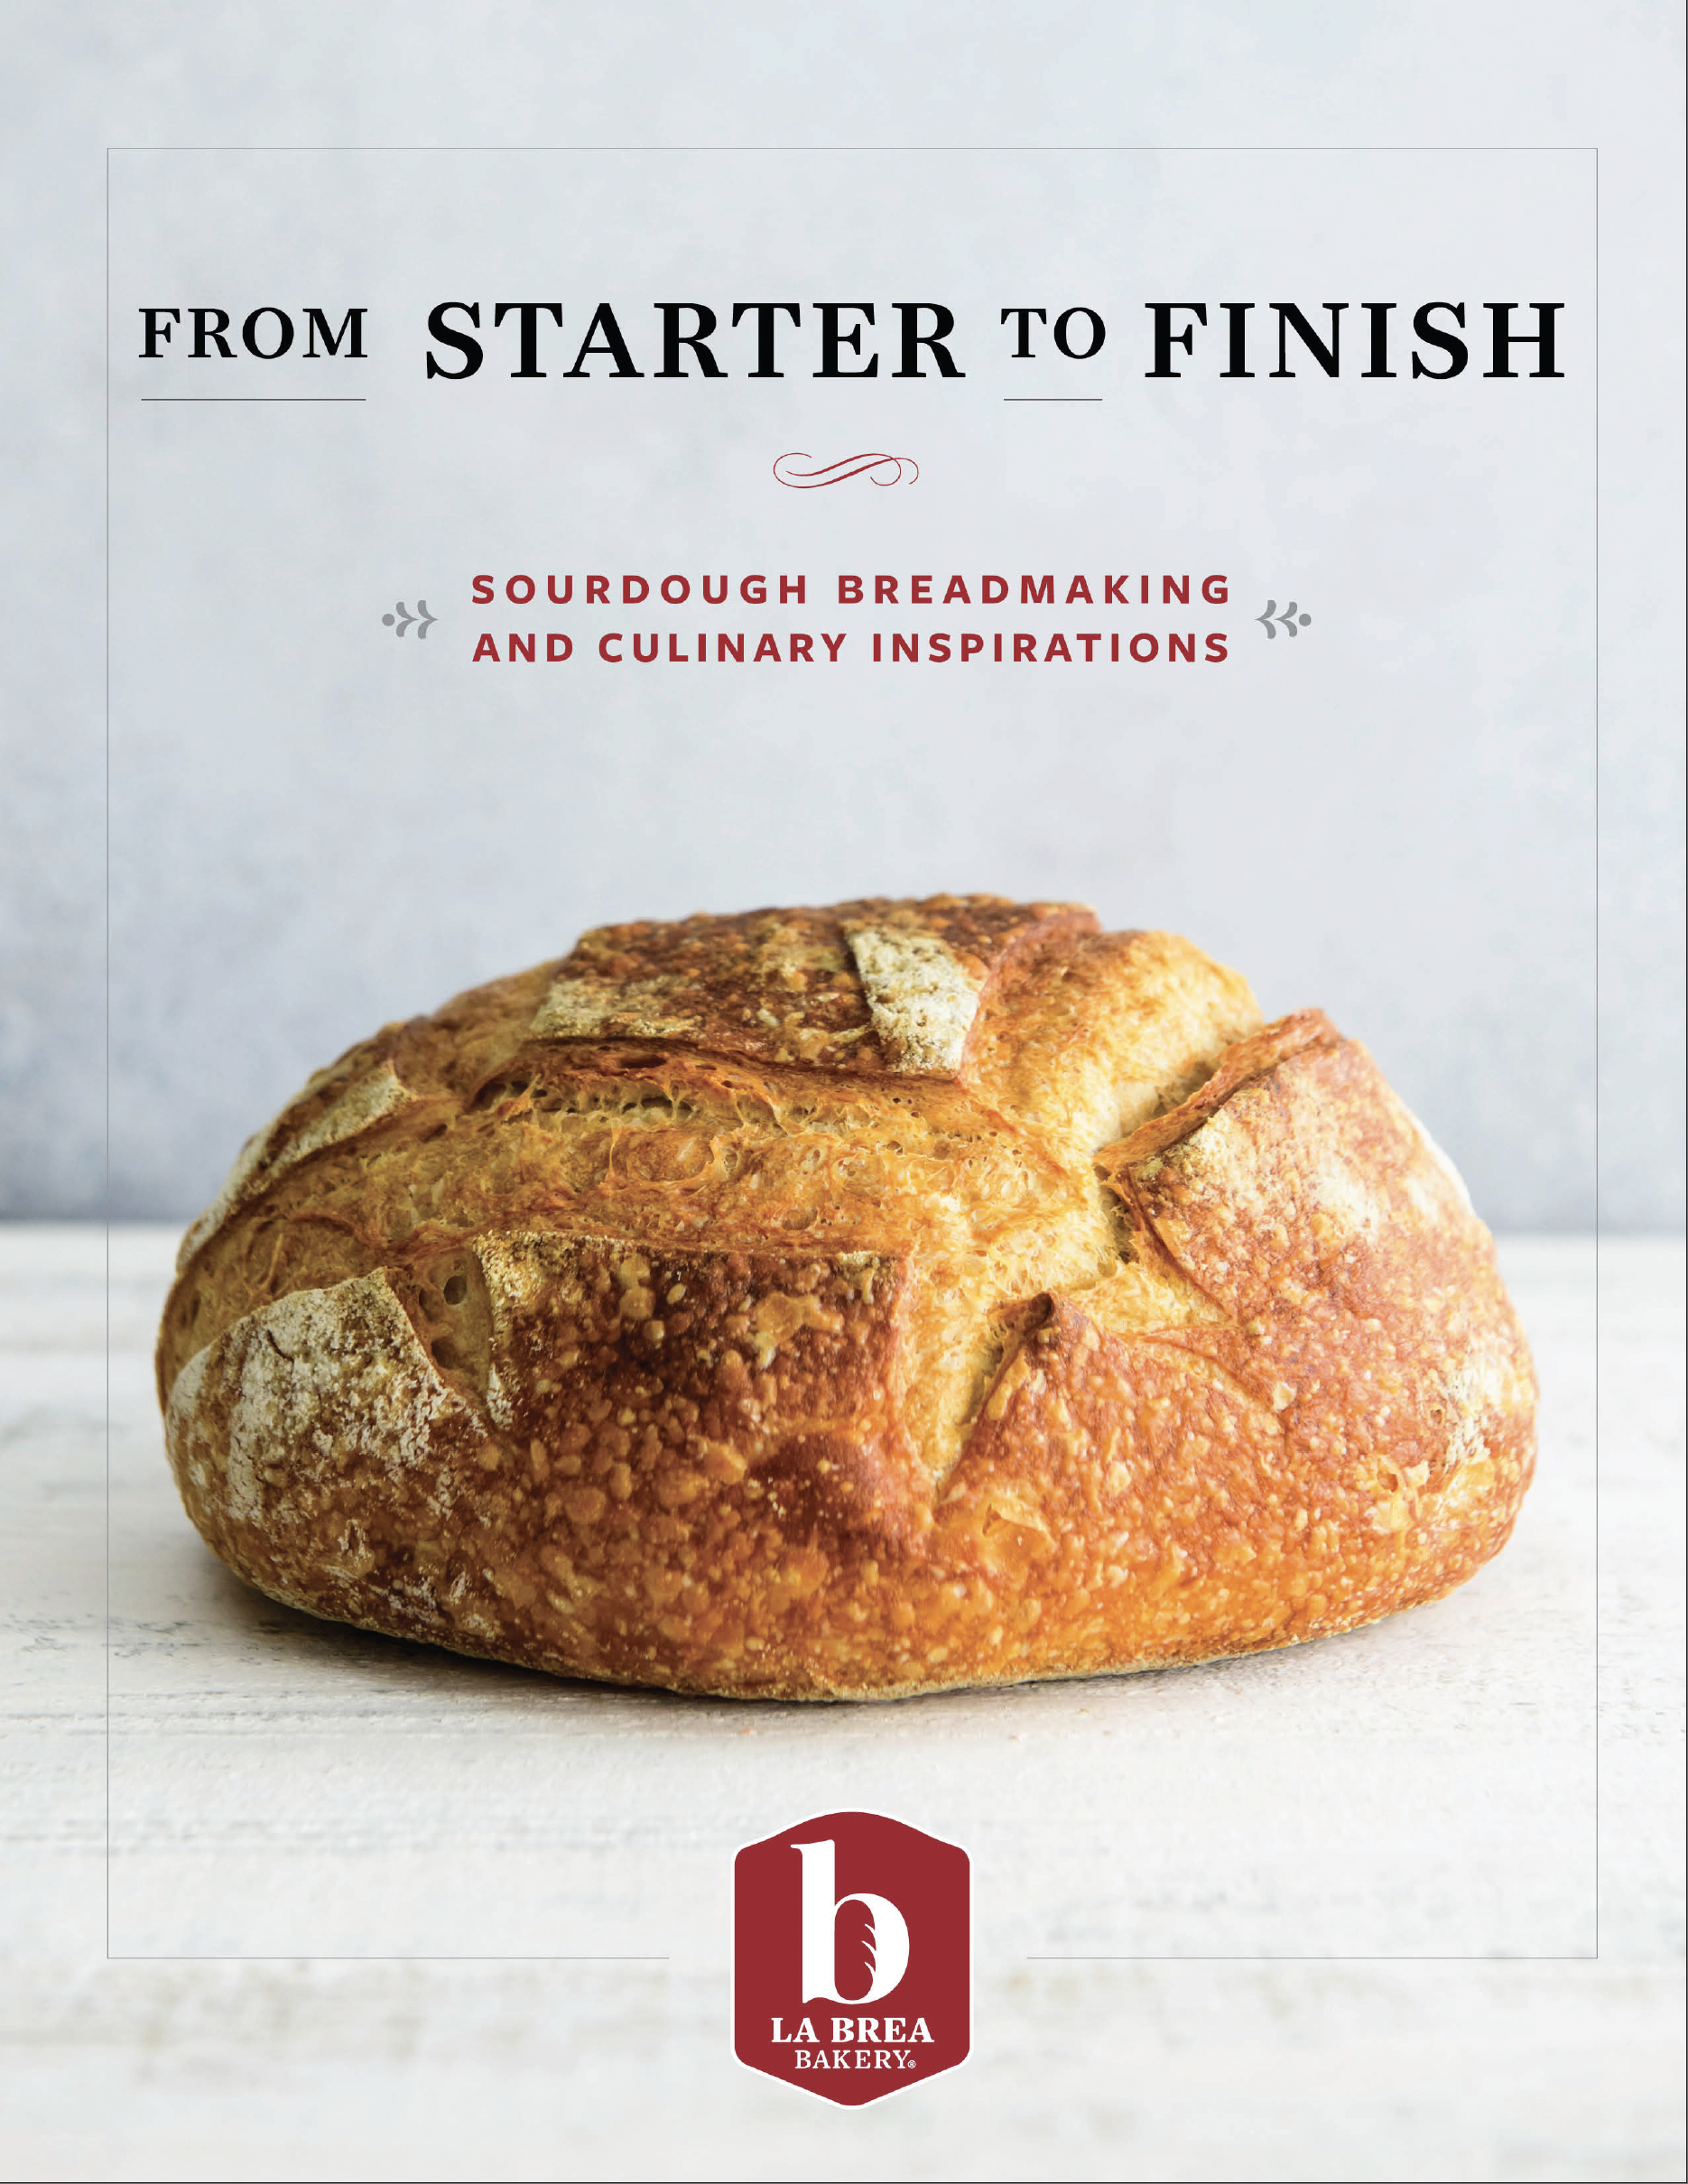 From Starter to Finish: Sourdough Breadmaking and Culinary Inspirations (La Brea Bakery) *SHIPS AFTER CHRISTMAS*